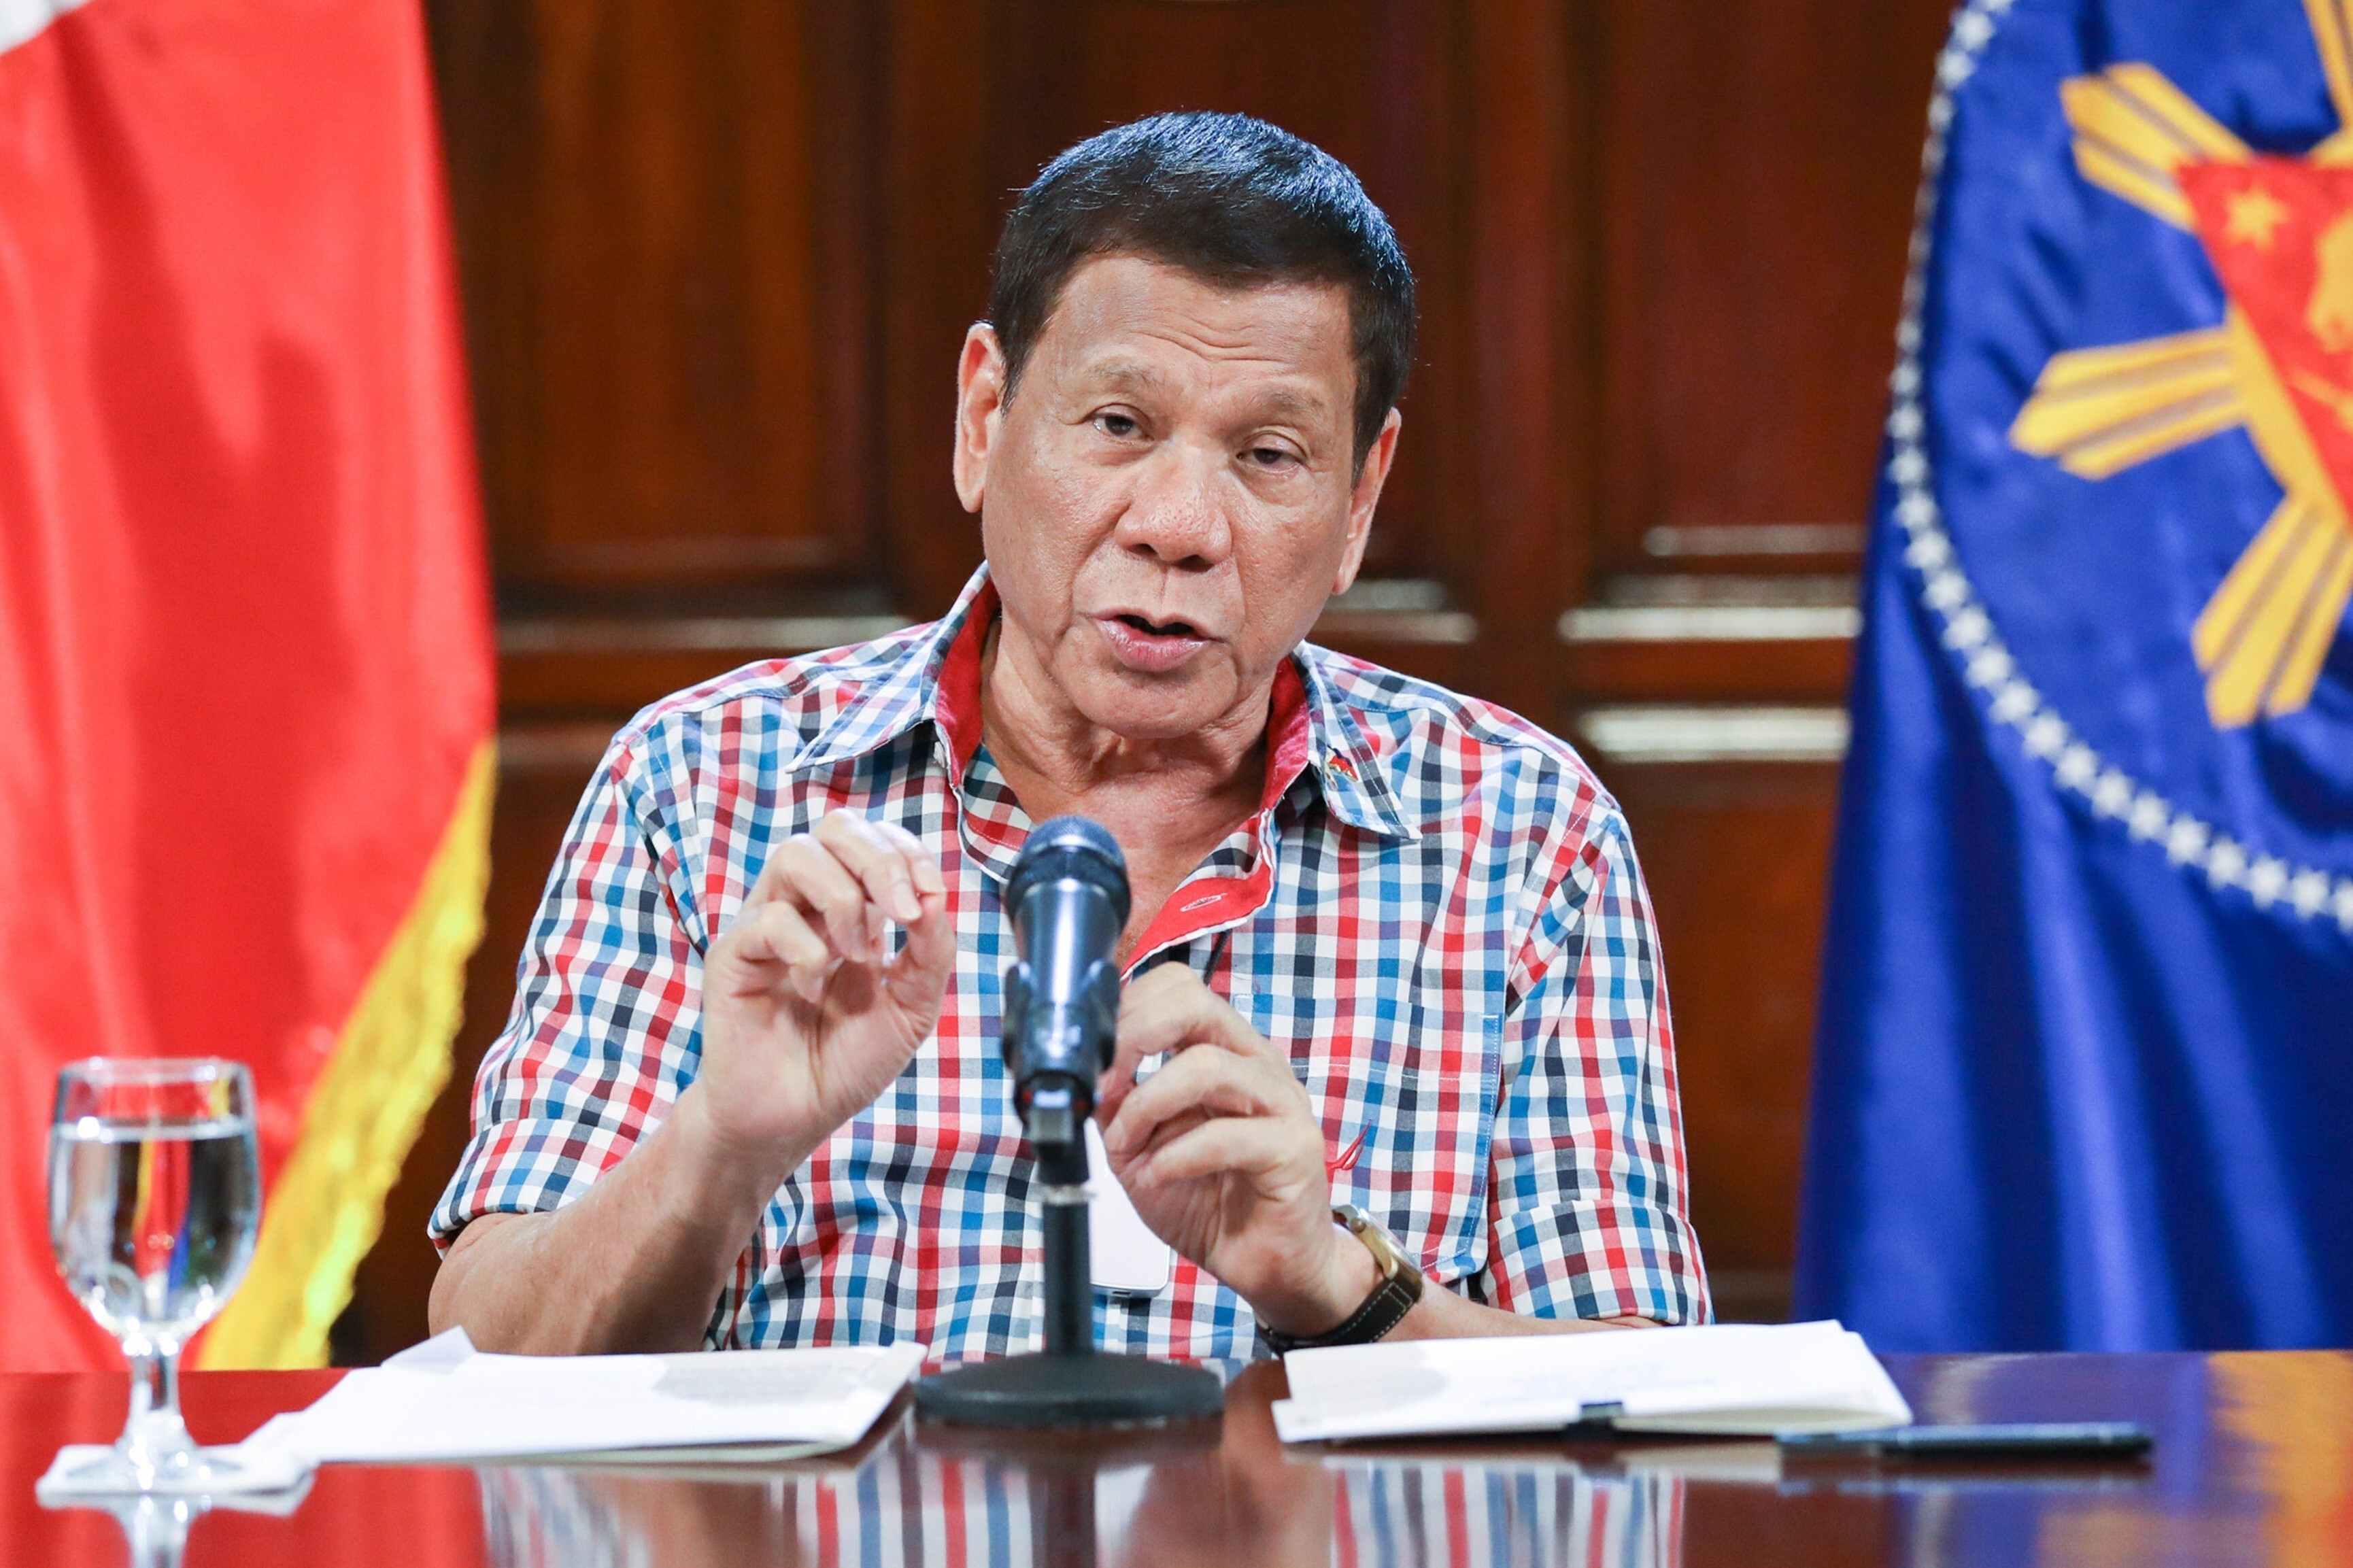 Philippine President Rodrigo Duterte only launched a lockdown after initially denying the pandemic was at risk of escalating. Photo: Malacanang Presidential Photographers Division via AP